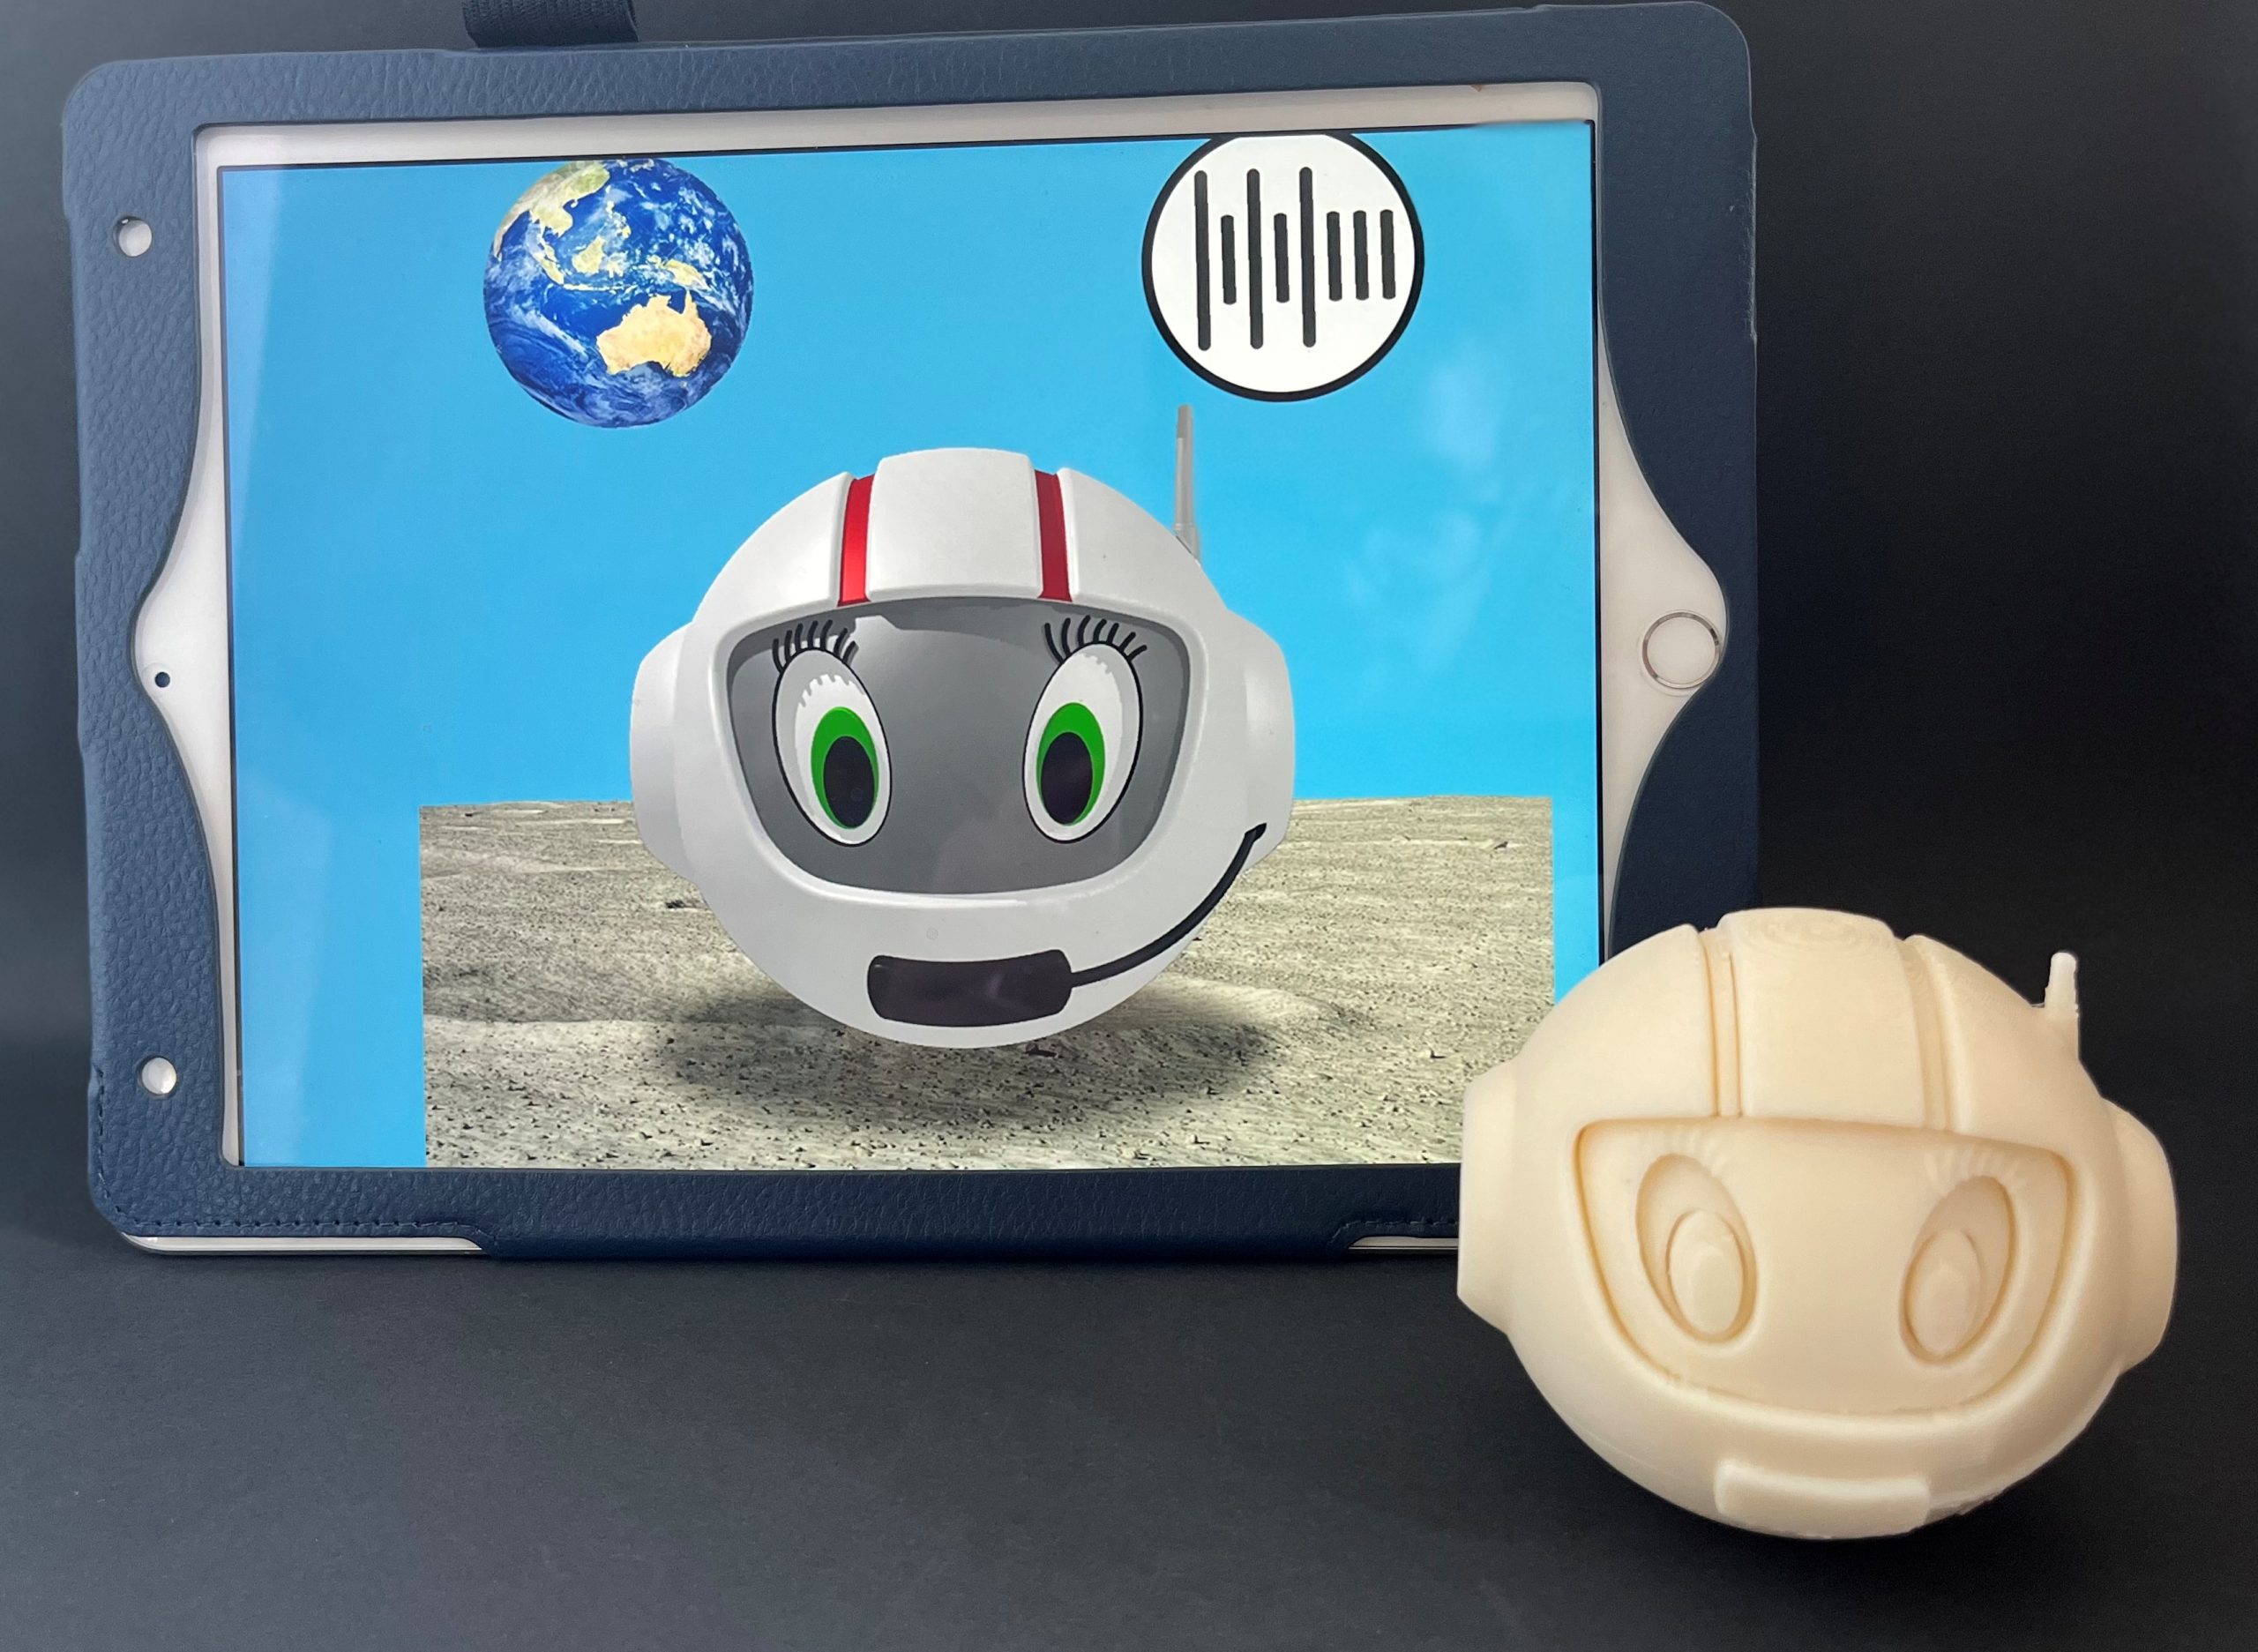 3D-printed CosmoBally next to iPad with digital app CosmoBally on Sonoplanet and